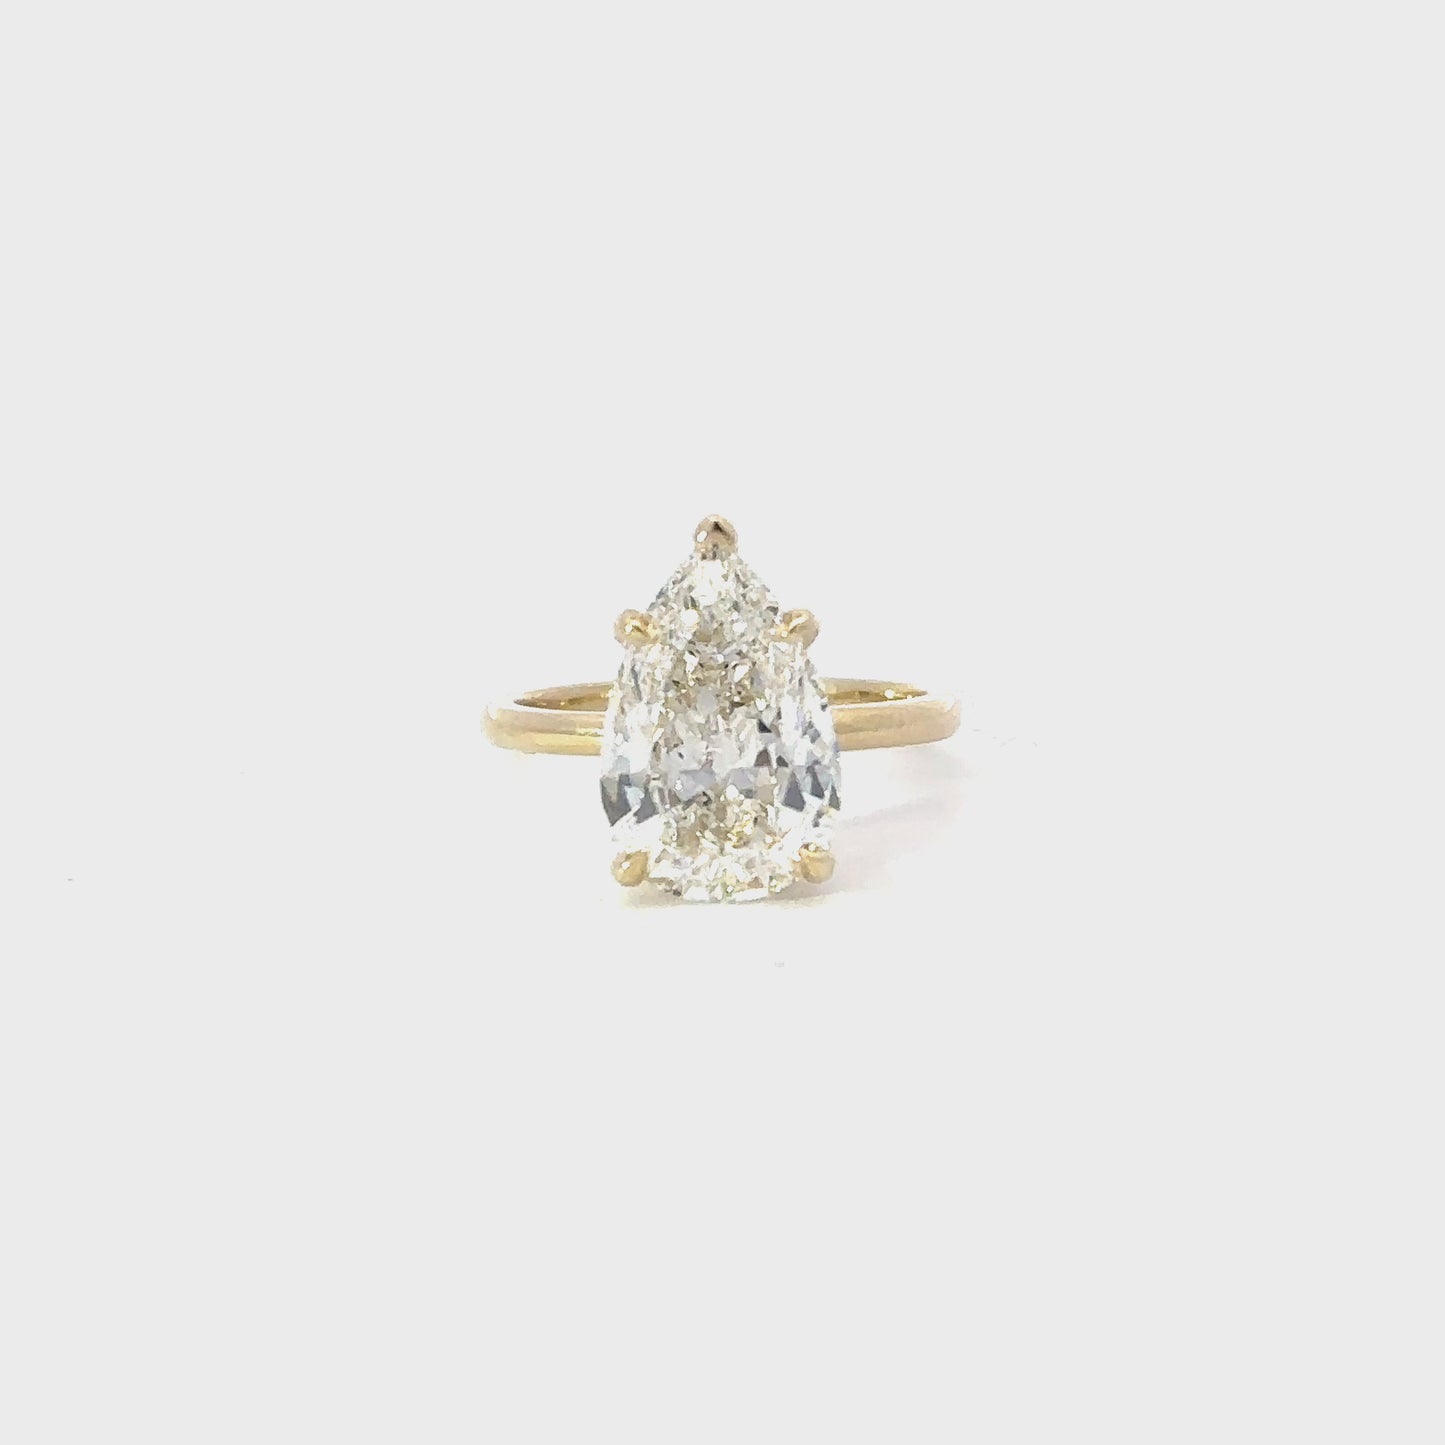 4.24 Carat Pear Natural Diamond Engagement Ring with Hidden Halo